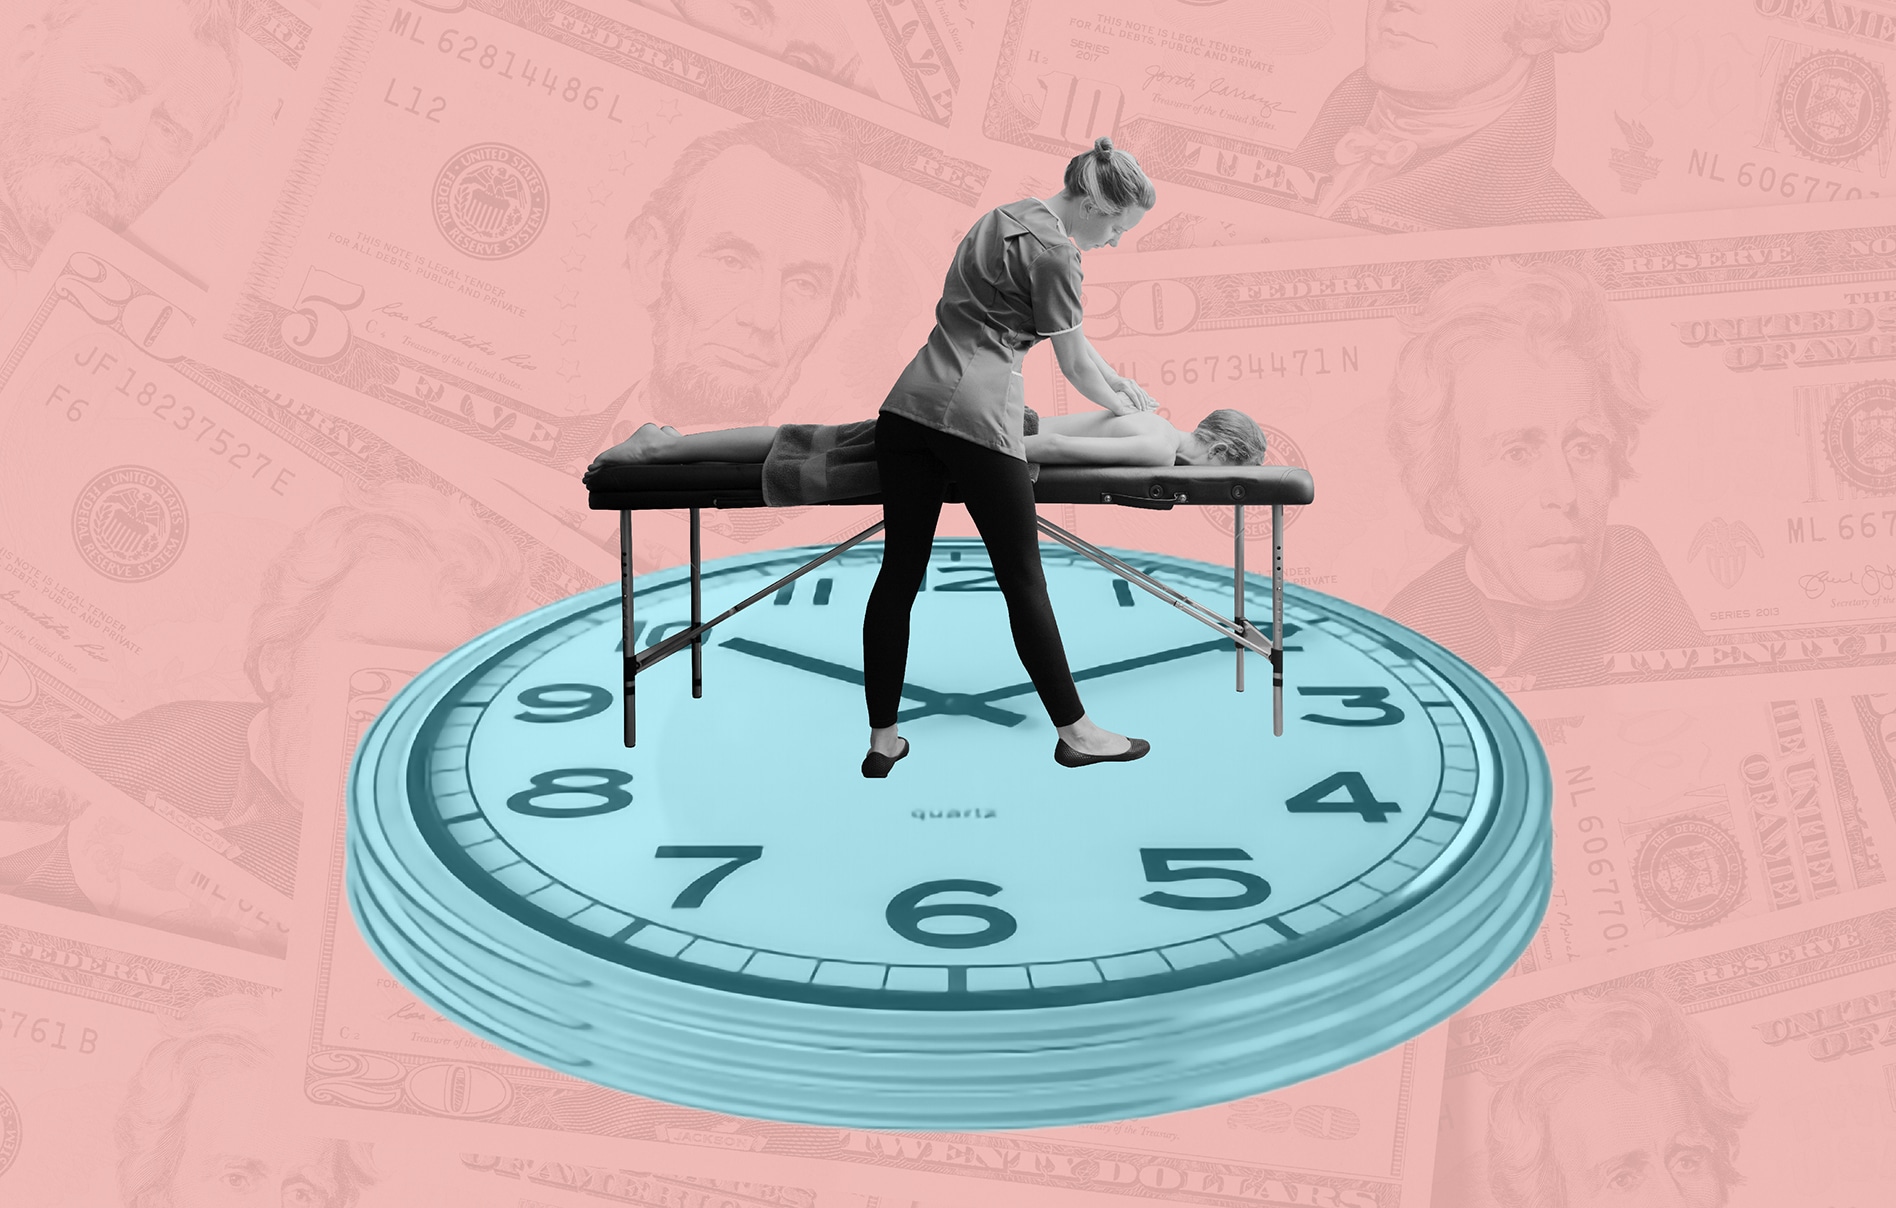 Person massaging another person on a table standing on a clock face with a background of paper money